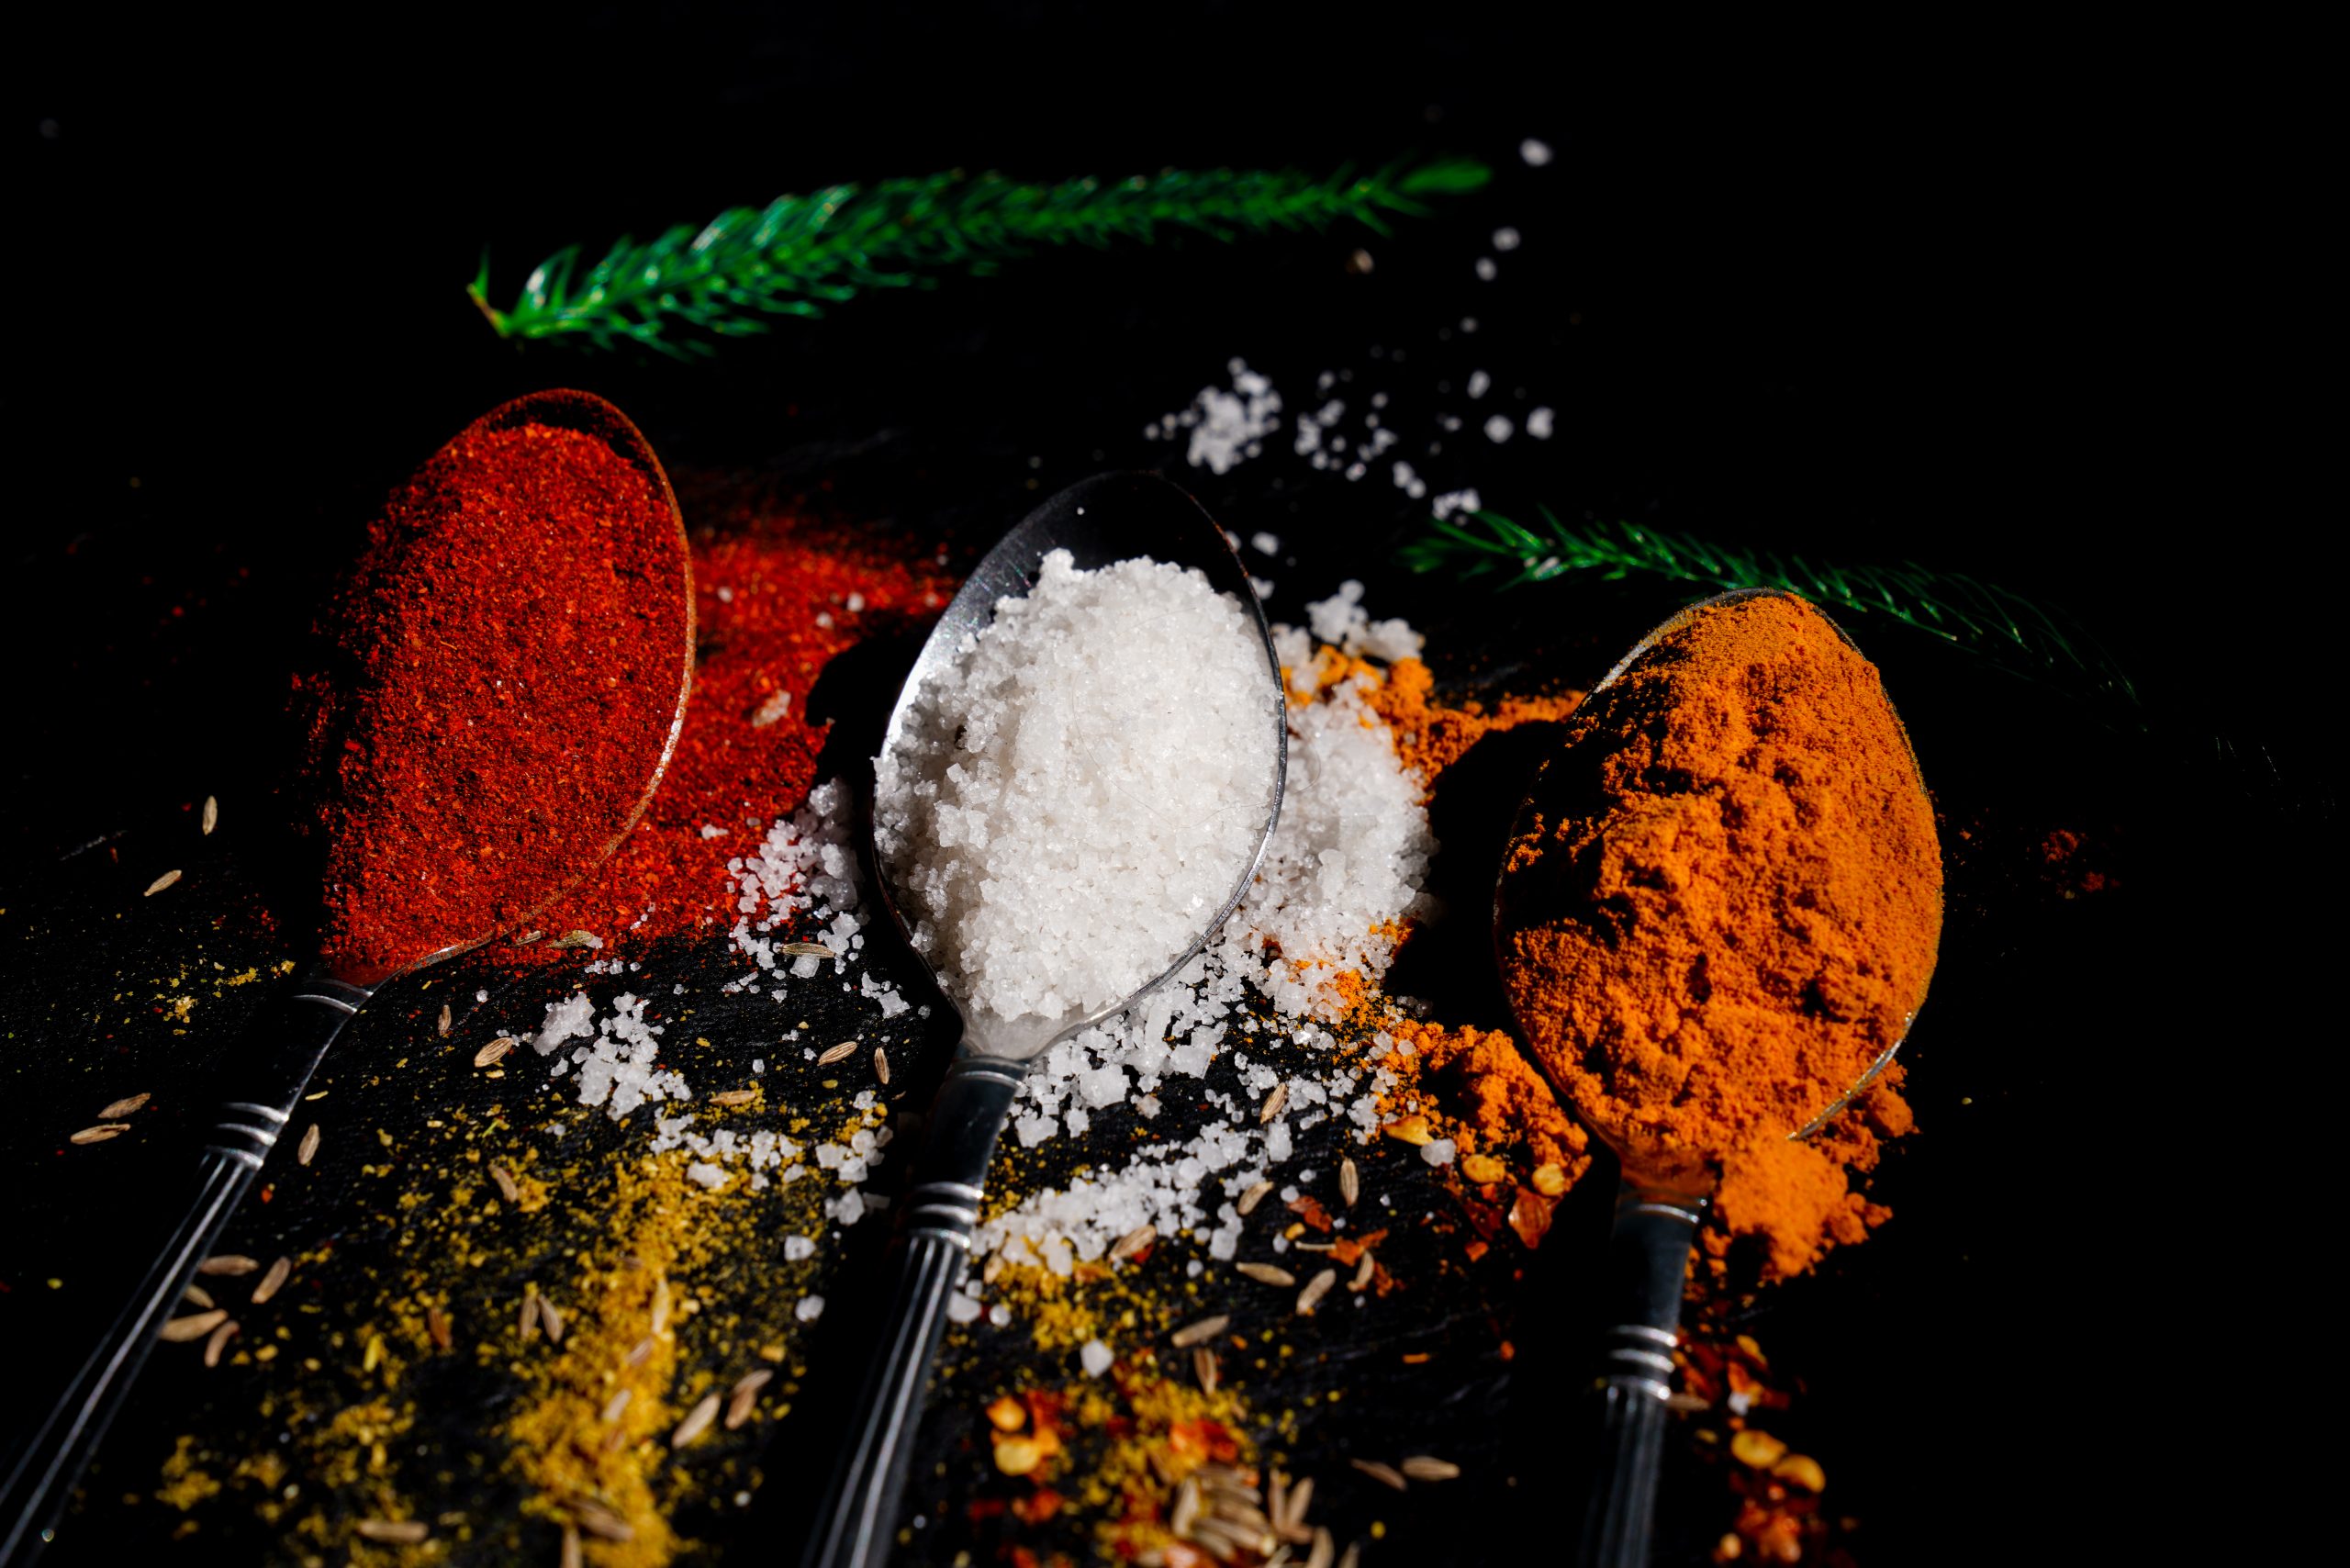 Indian grinded spices